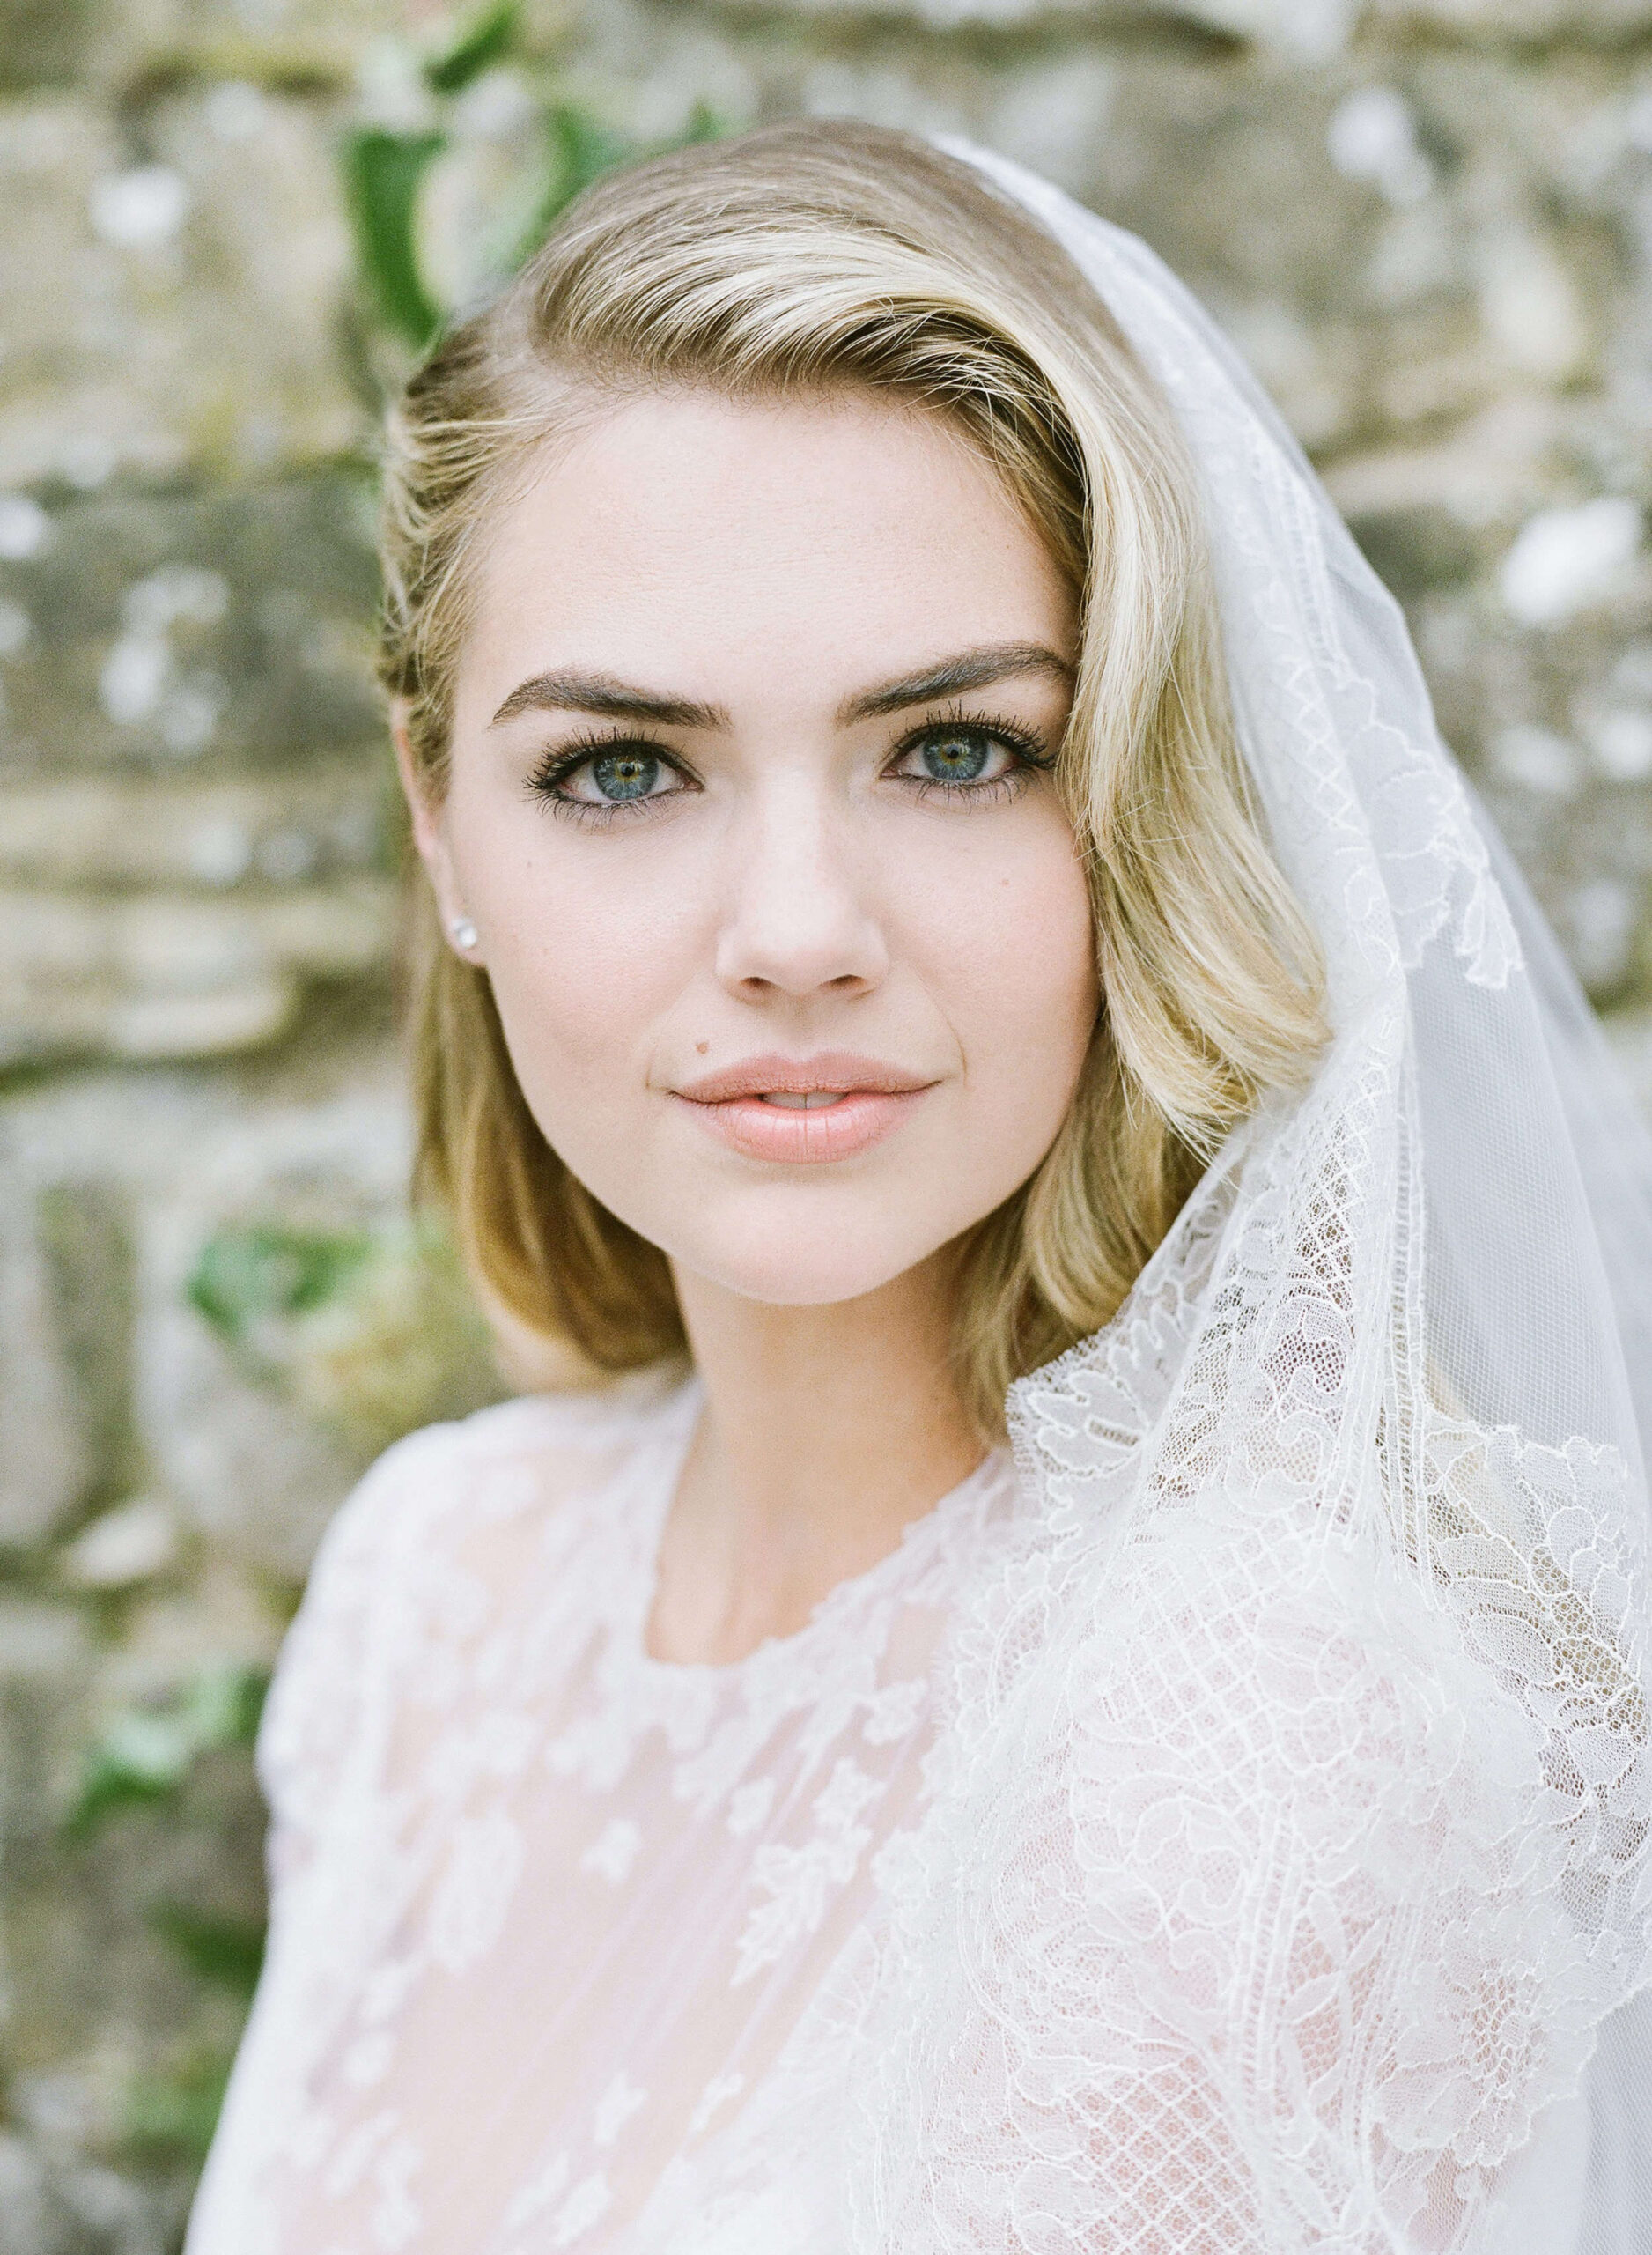 Kate Upton’s custom Valentino spring wedding gown and veil